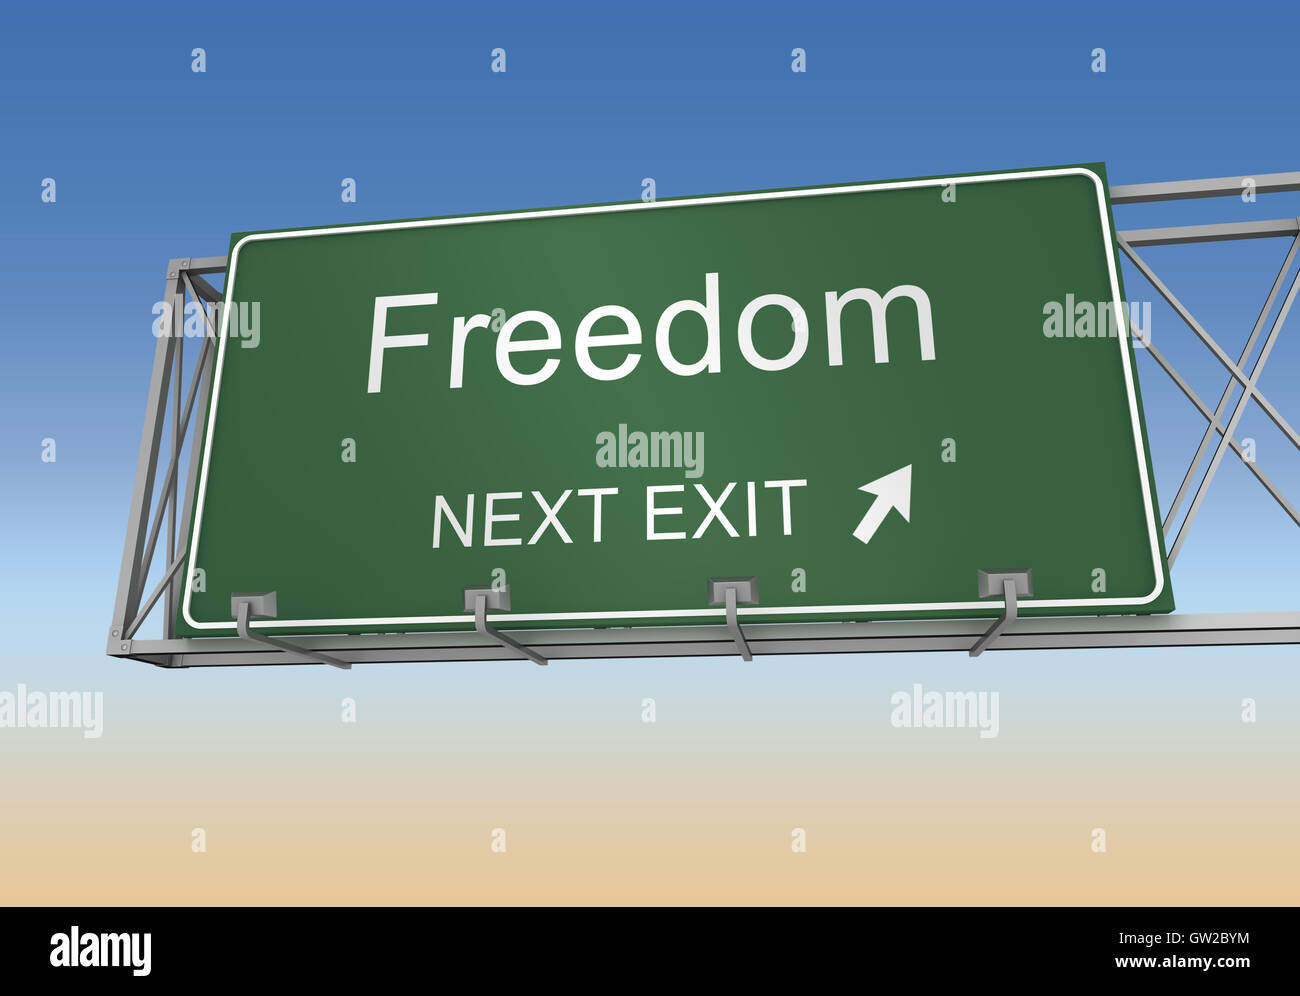 freedom road sign 3d illustration Stock Photo